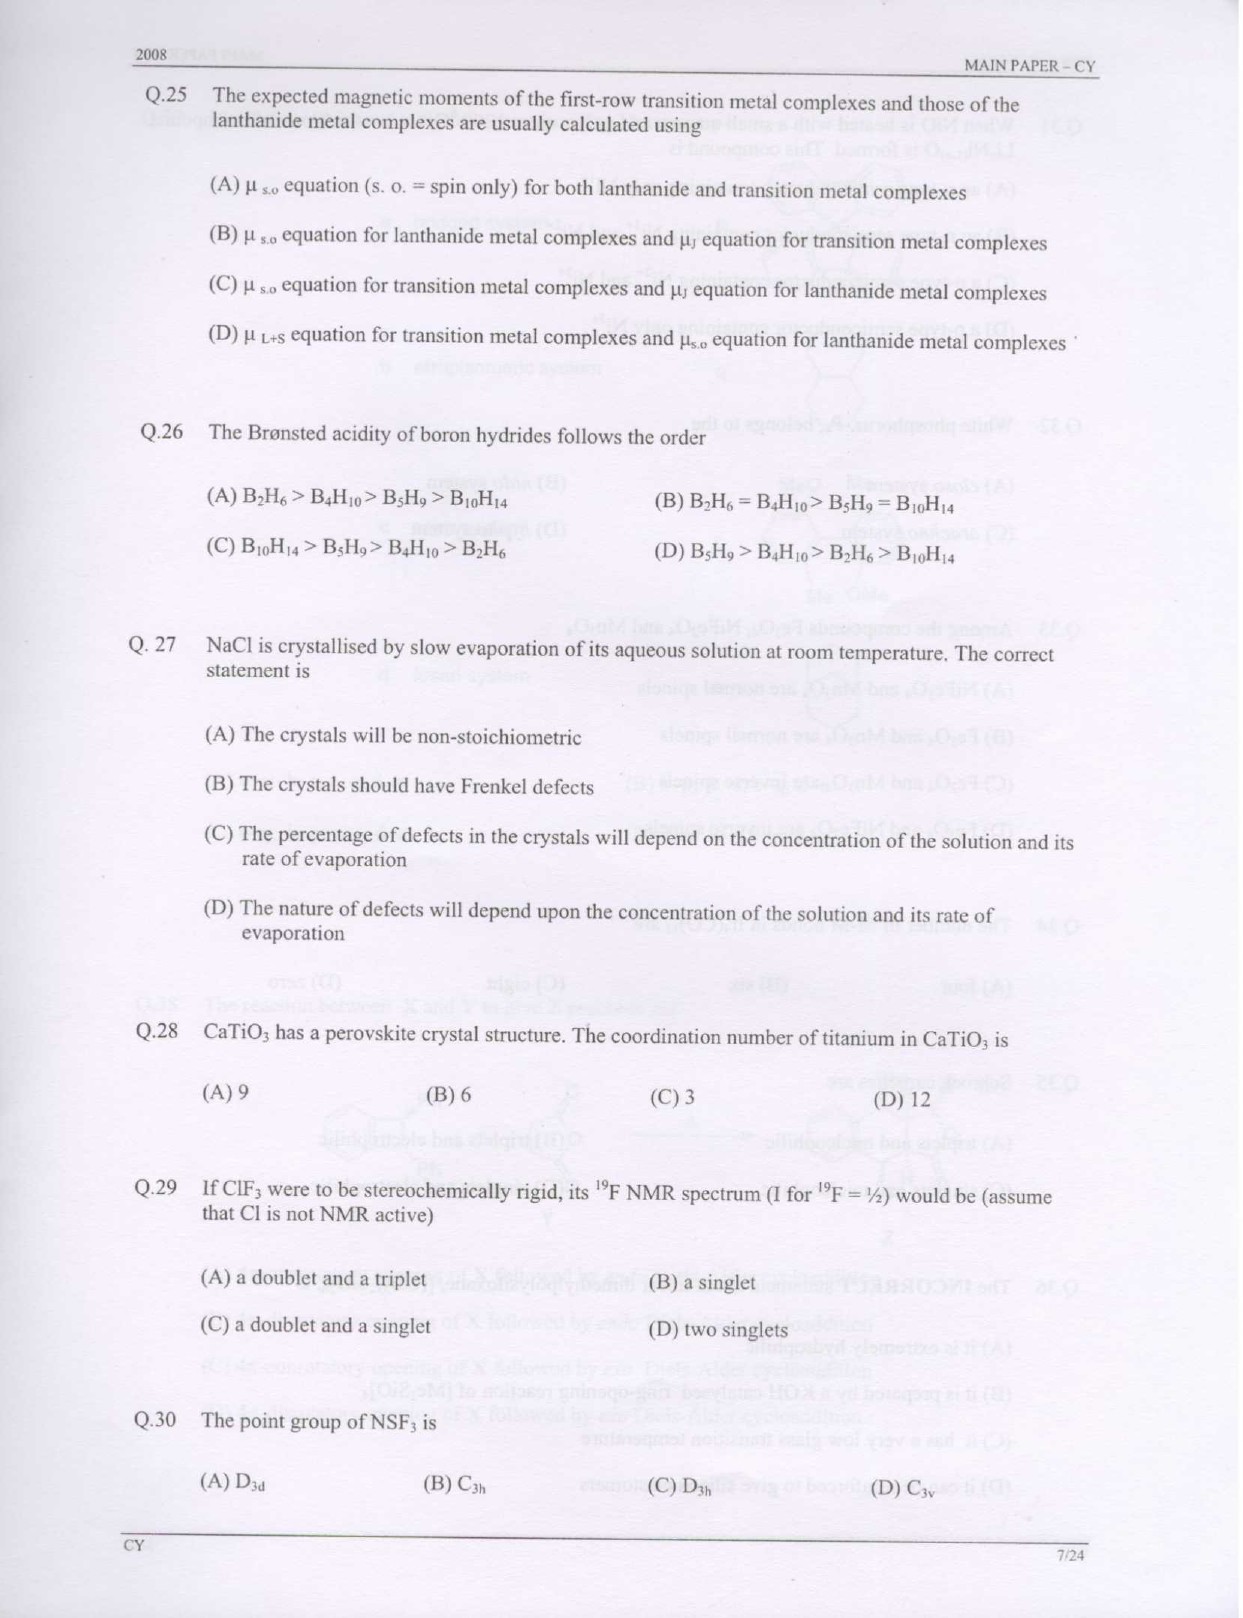 GATE Exam Question Paper 2008 Chemistry 7